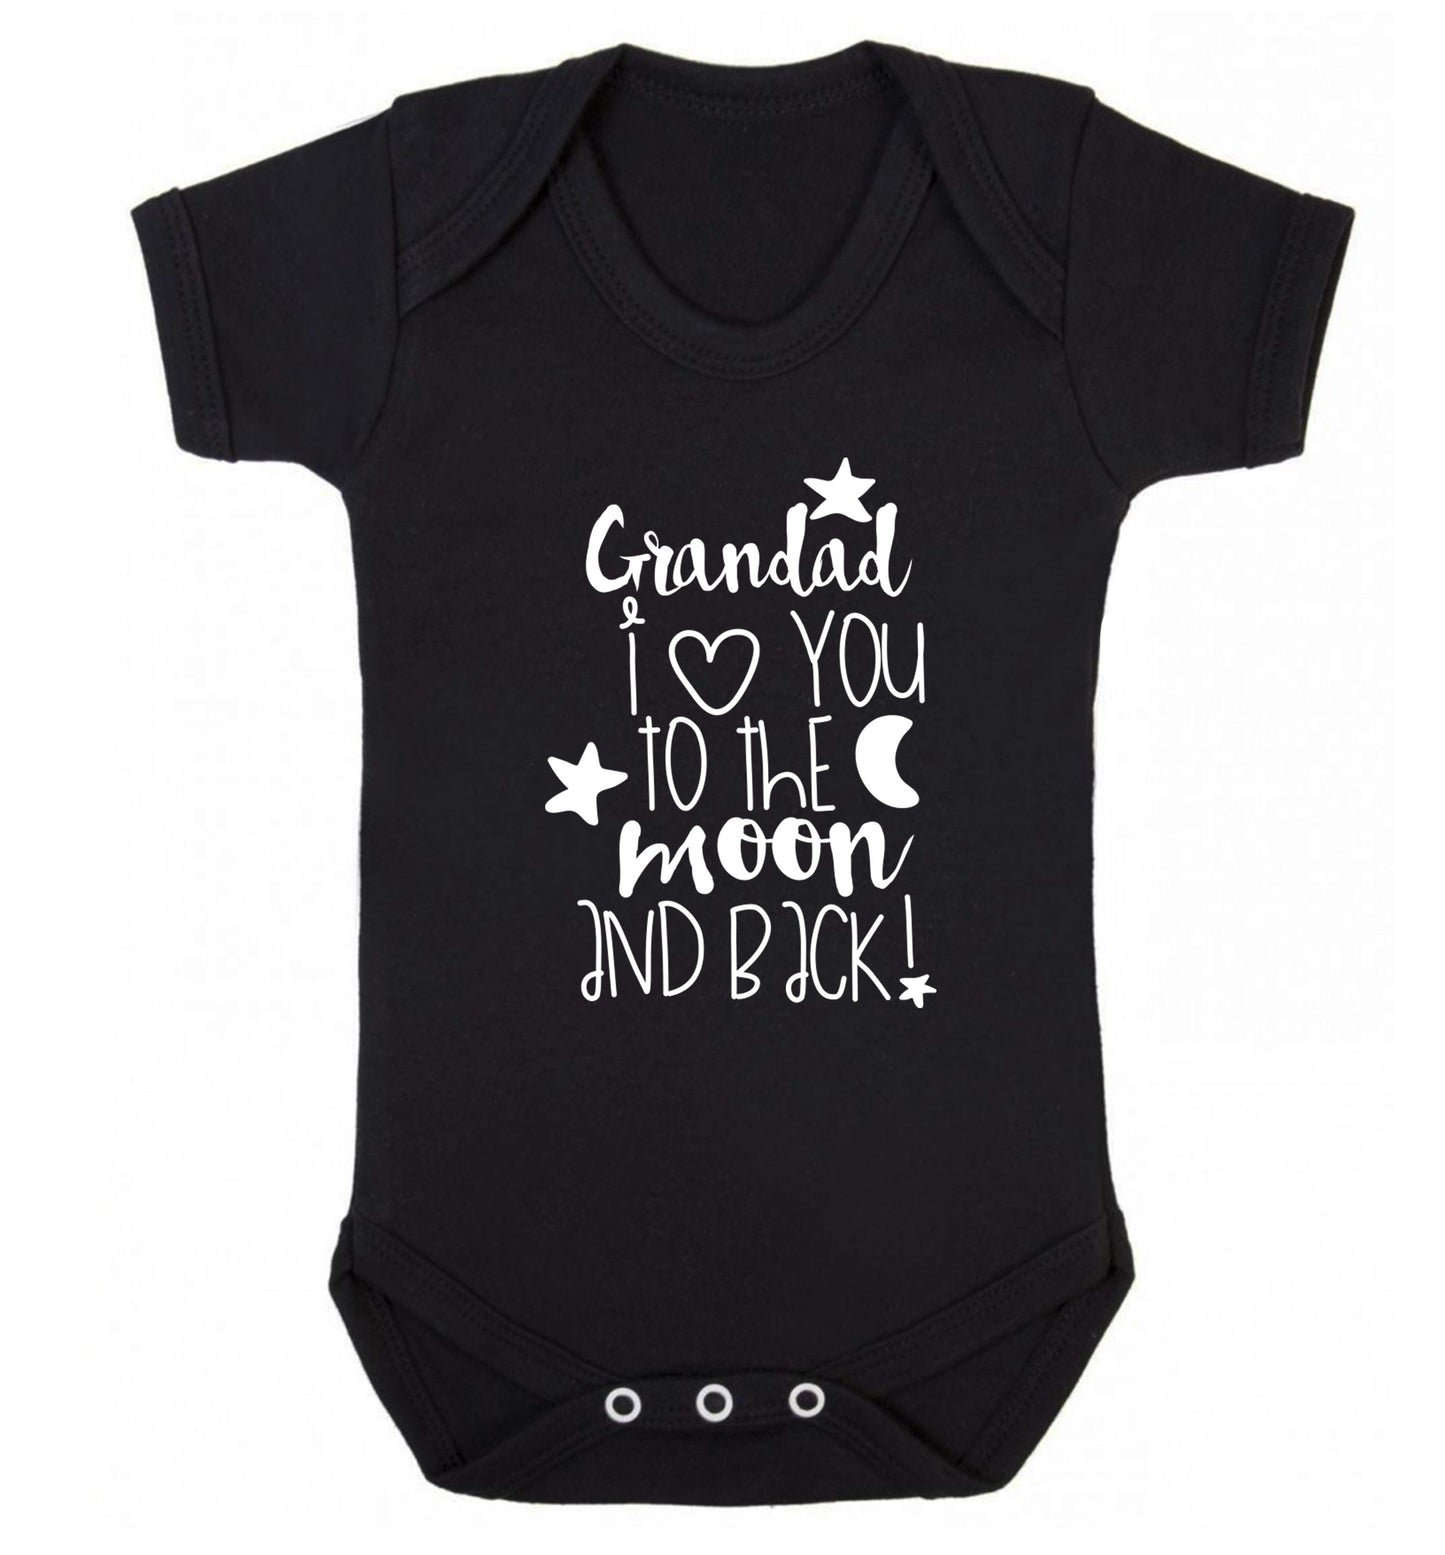 Grandad's I love you to the moon and back Baby Vest black 18-24 months